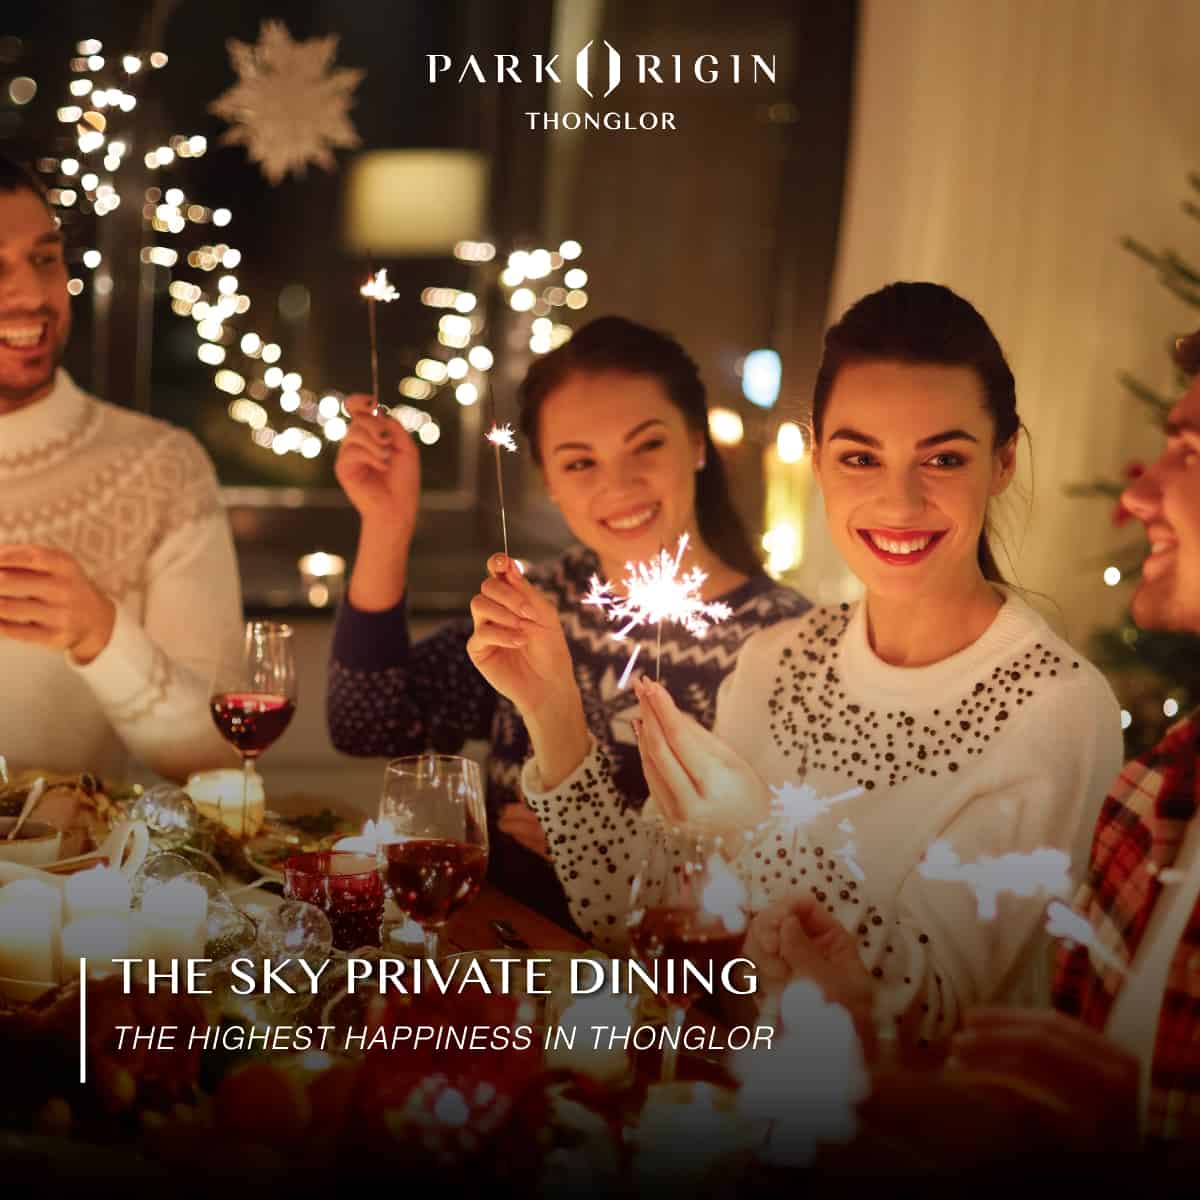 The Sky Facilities - The Sky Private Dining | PARK ORIGIN THONGLOR